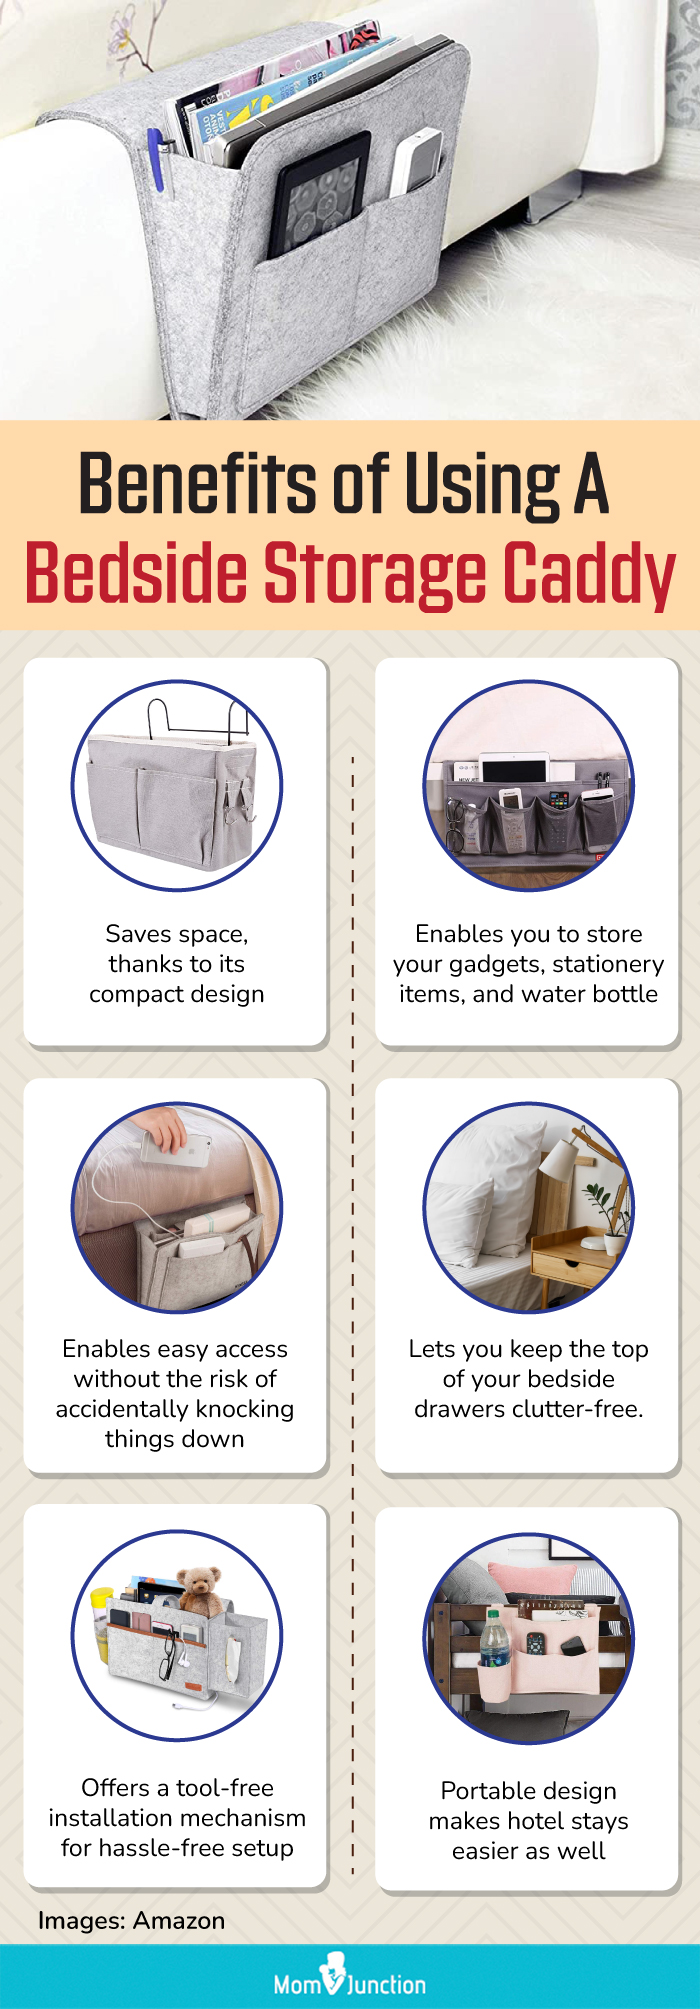 Benefits of Using A Bedside Storage Caddy (infographic)